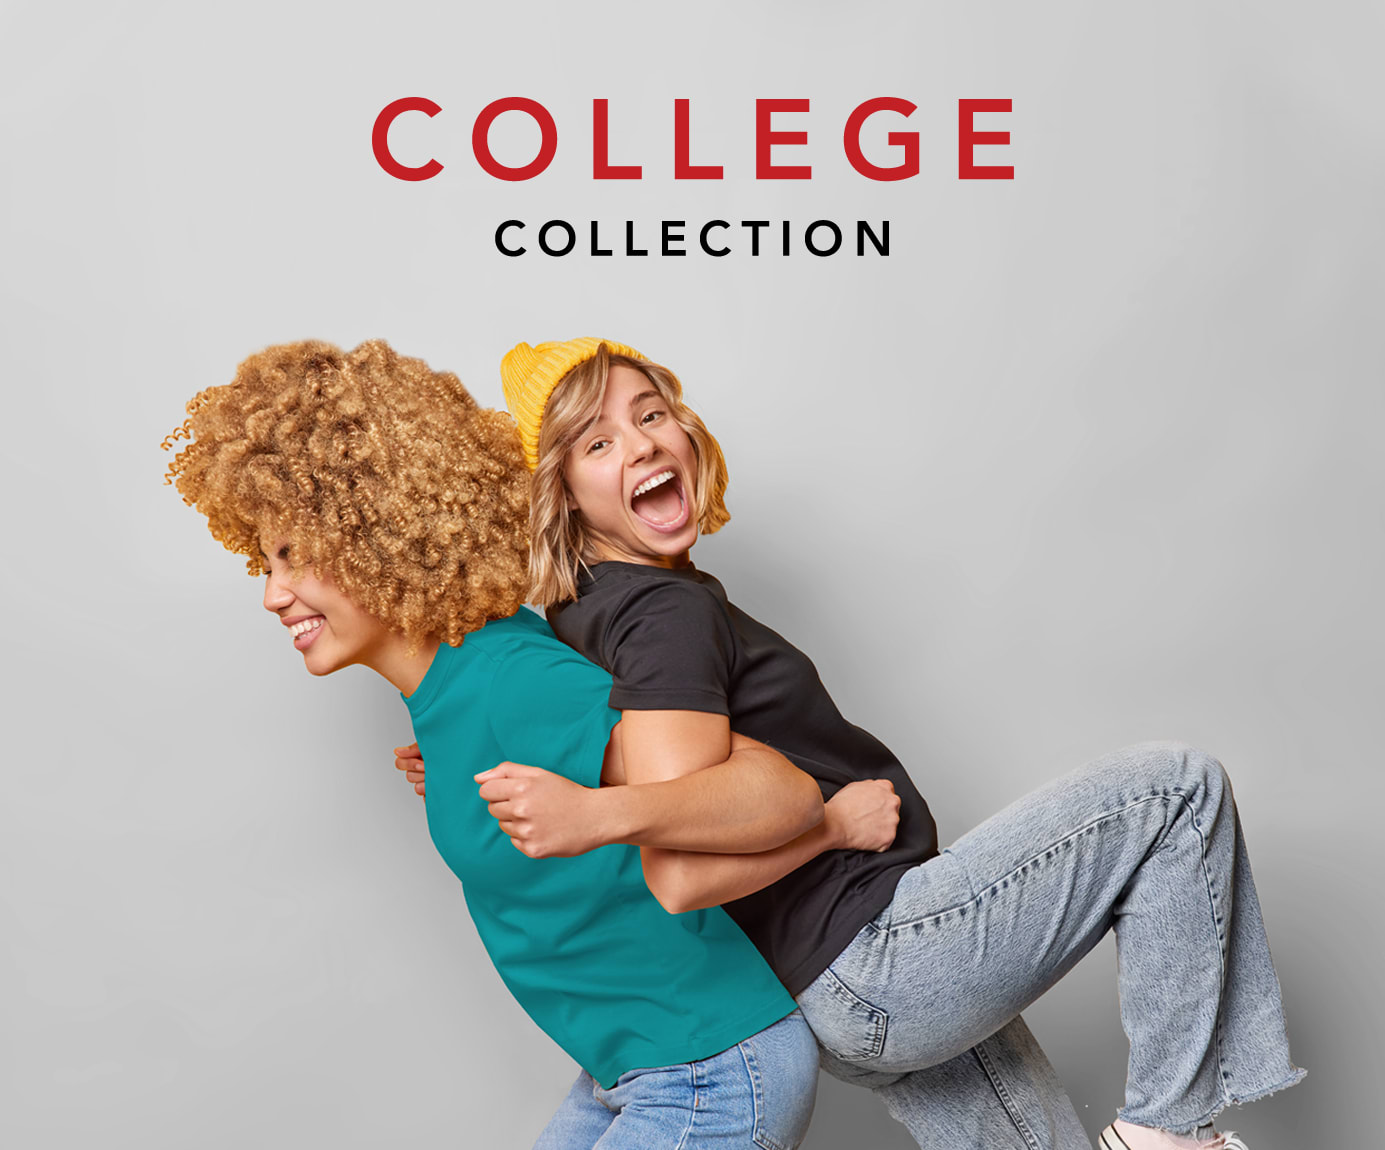 Solutions for College Students